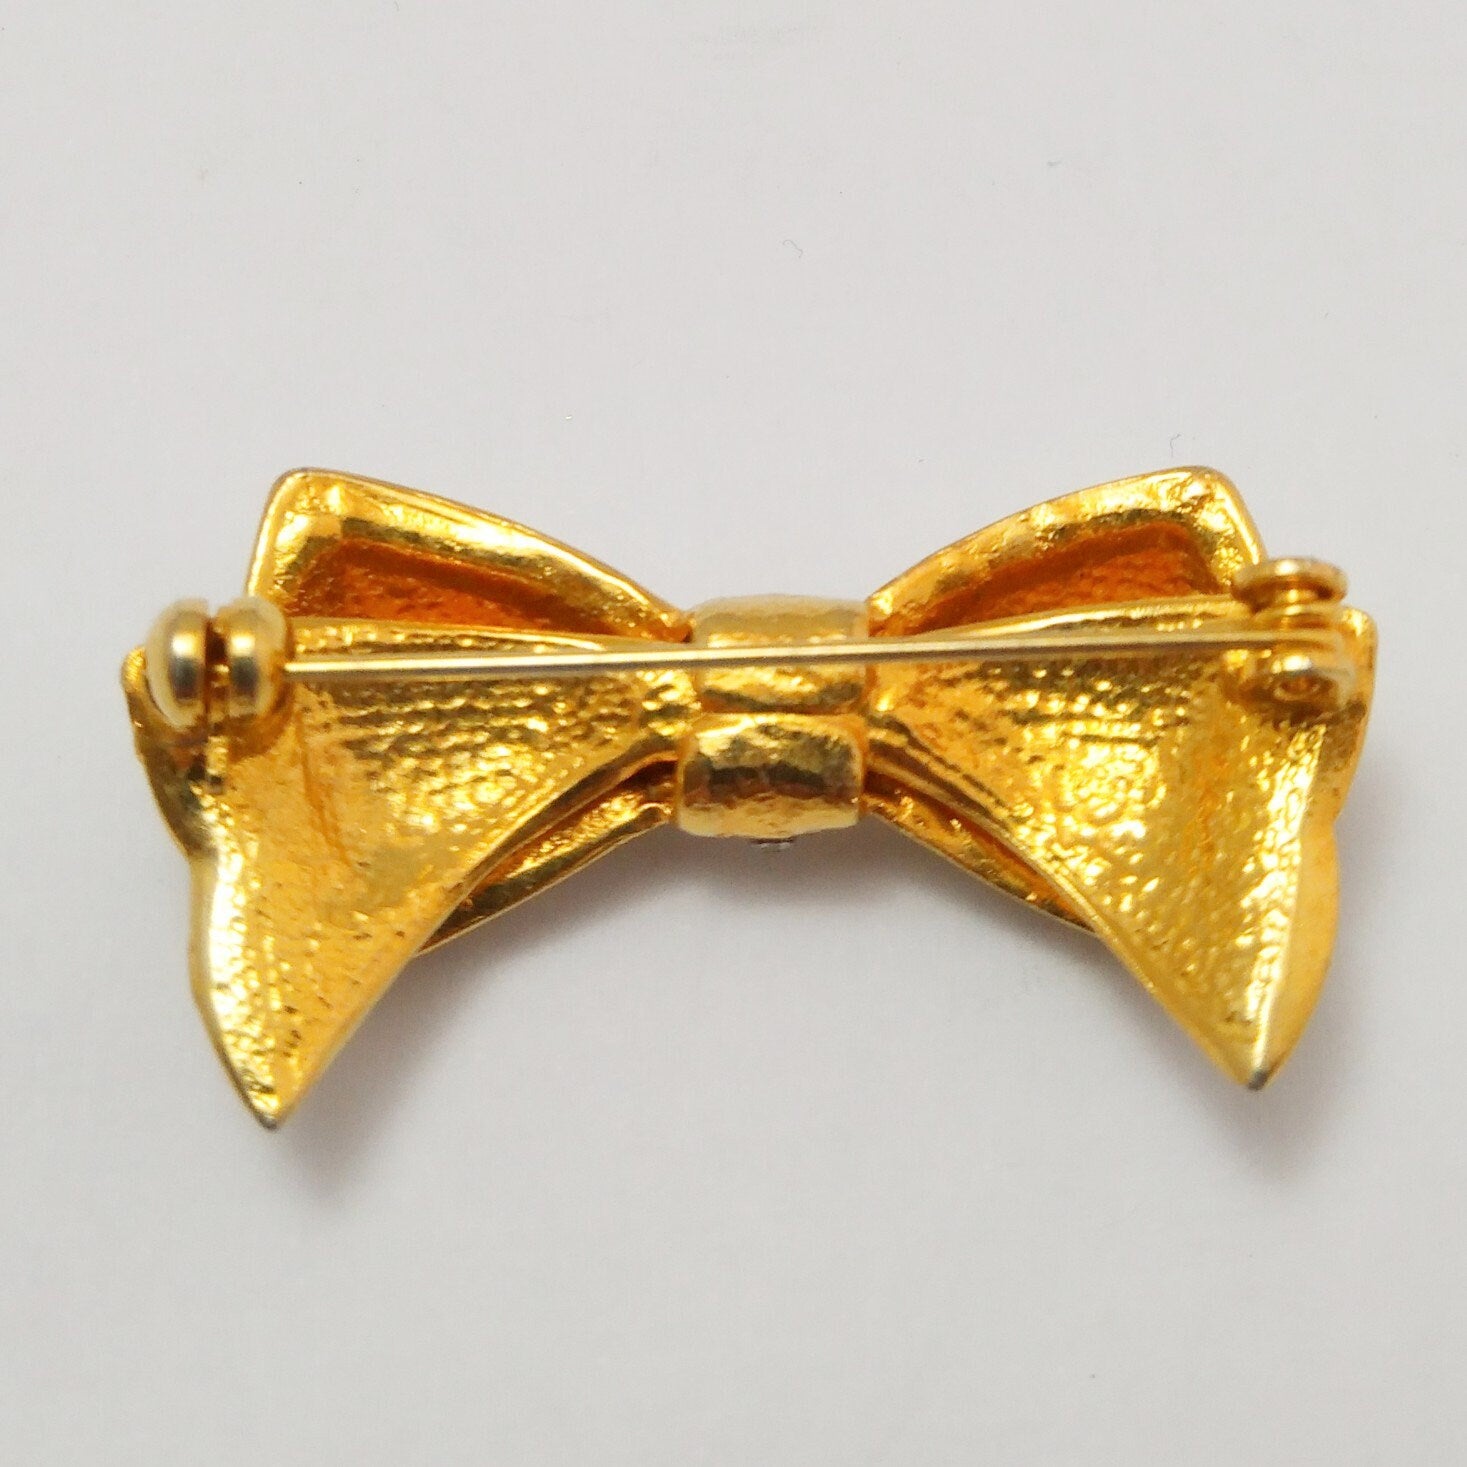 Vintage French bow Brooch with rhinestones - Secondista